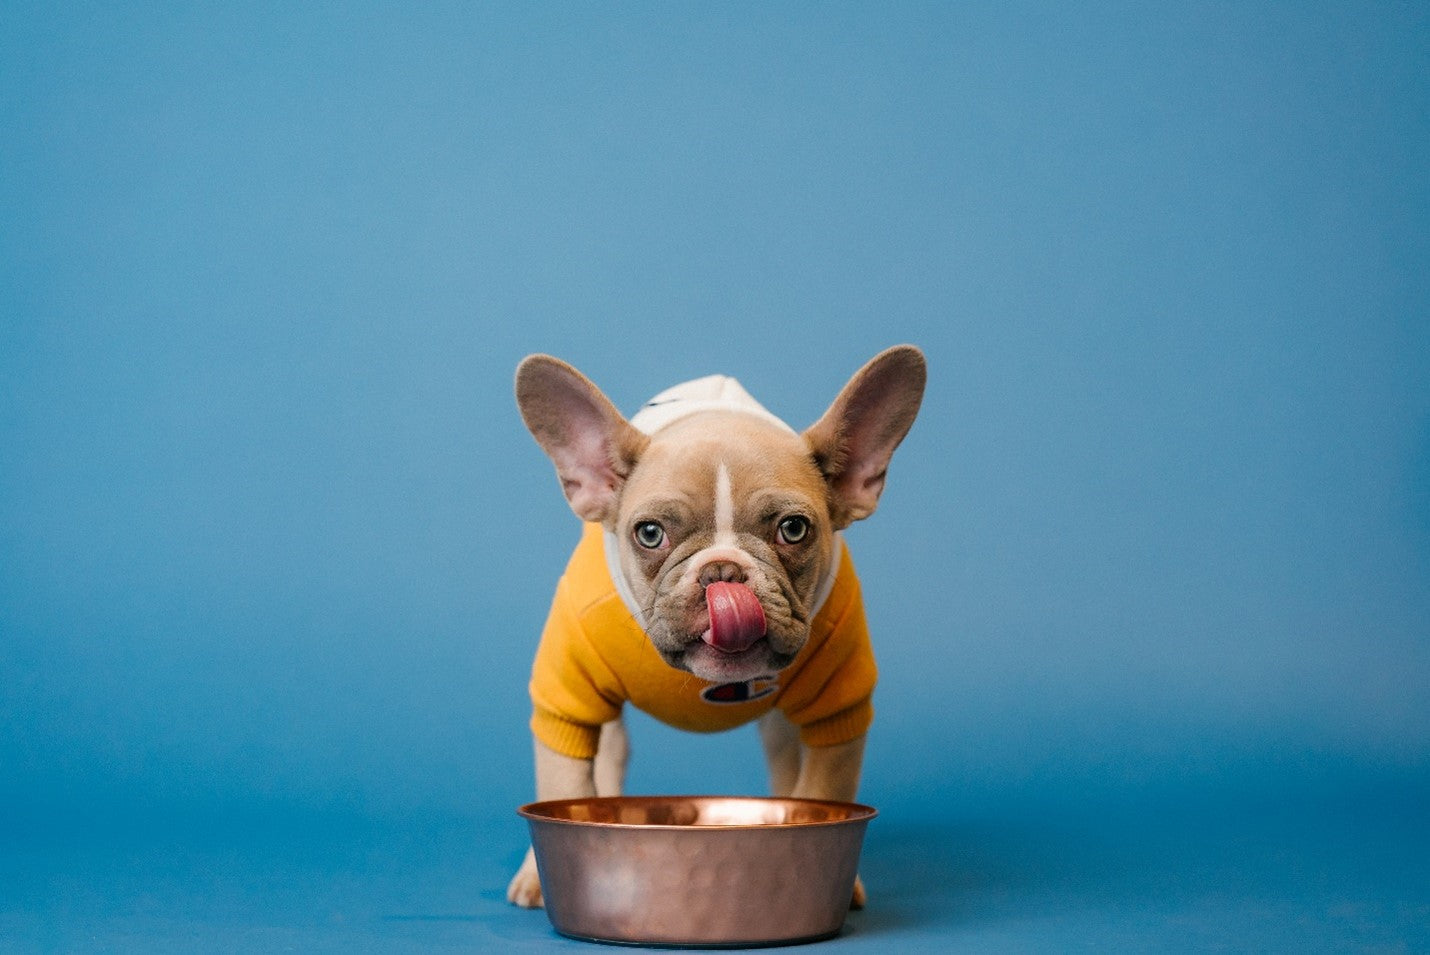 A picture containing dog licking chops after tasting food